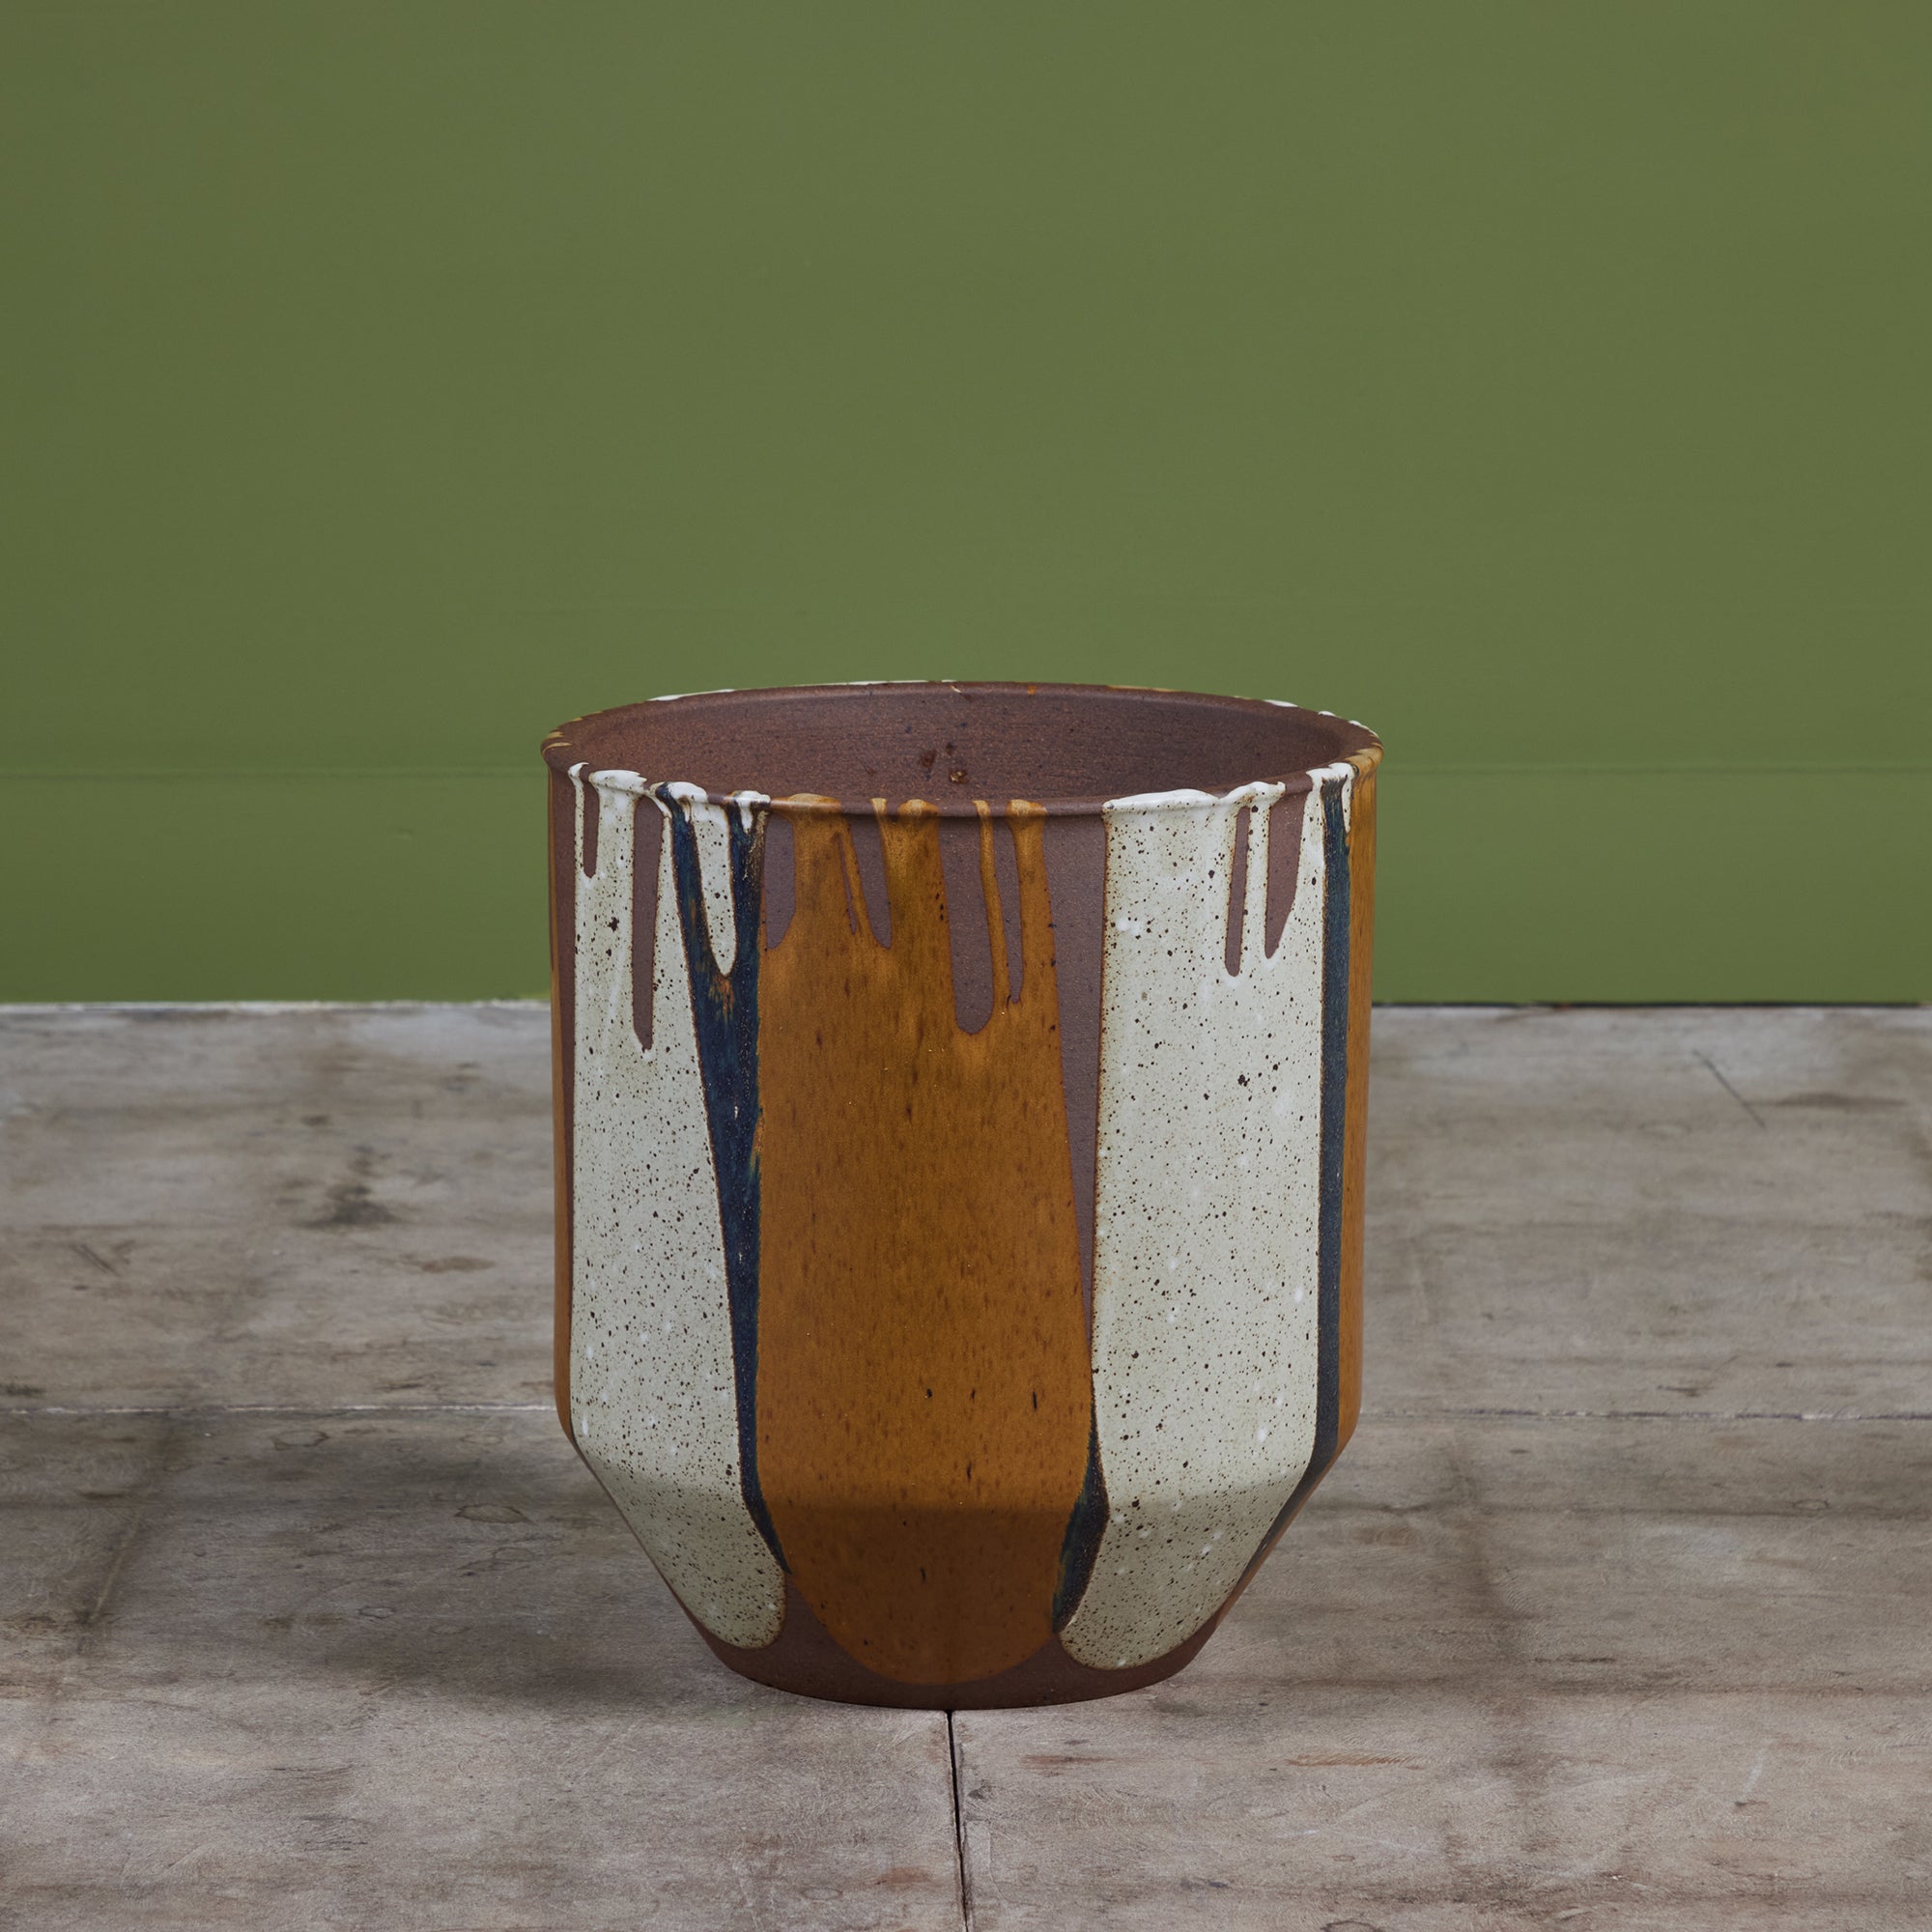 ON HOLD**David Cressey Flame-Glazed Planter for Architectural Pottery